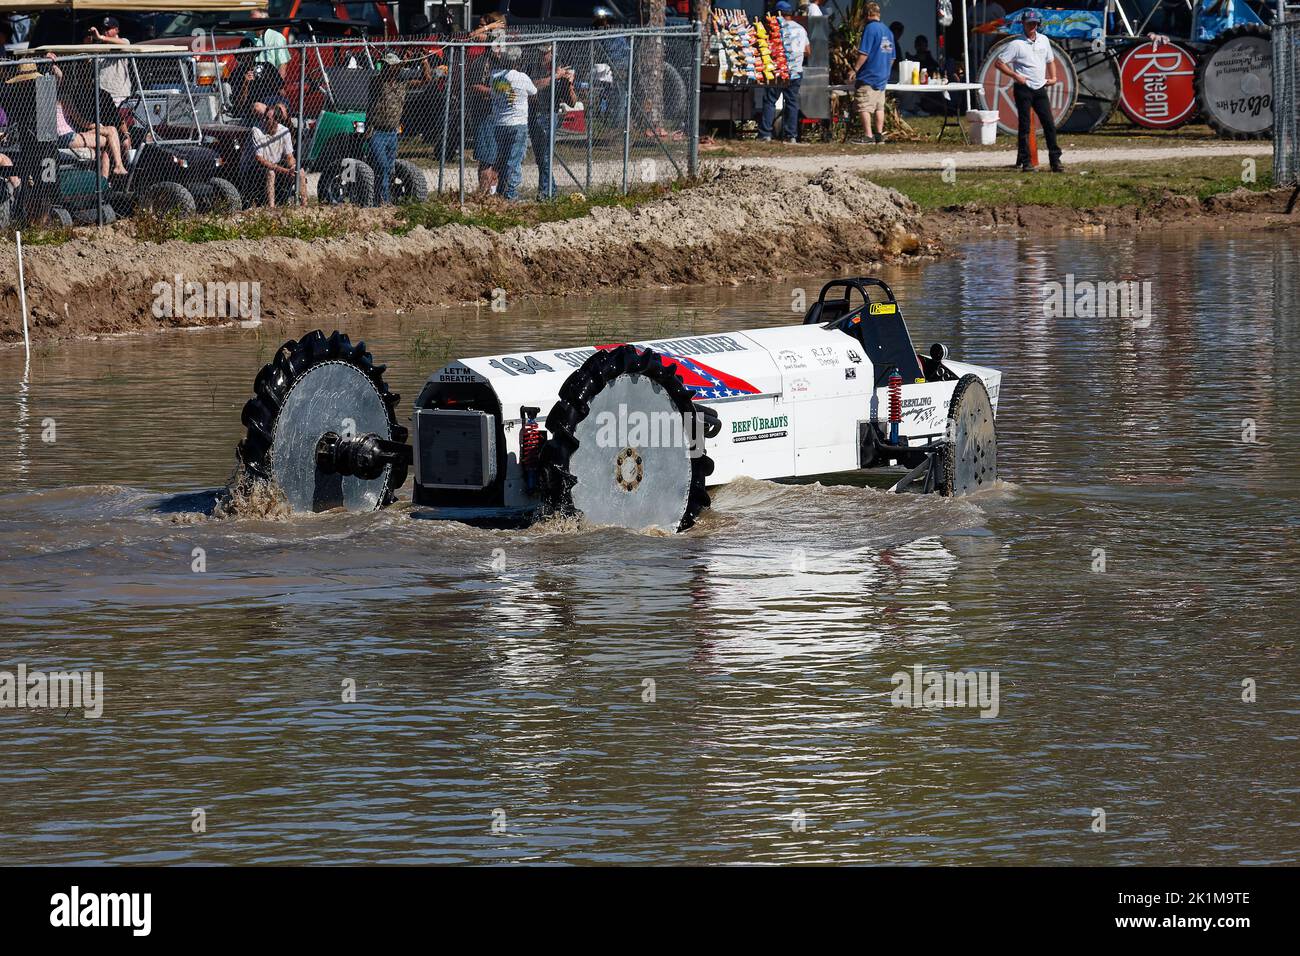 swamp buggy moving through water, action, close-up, motion, jeep style, vehicle sport,  muddy bank, spectators, Florida Sports Park, Naples, FL Stock Photo